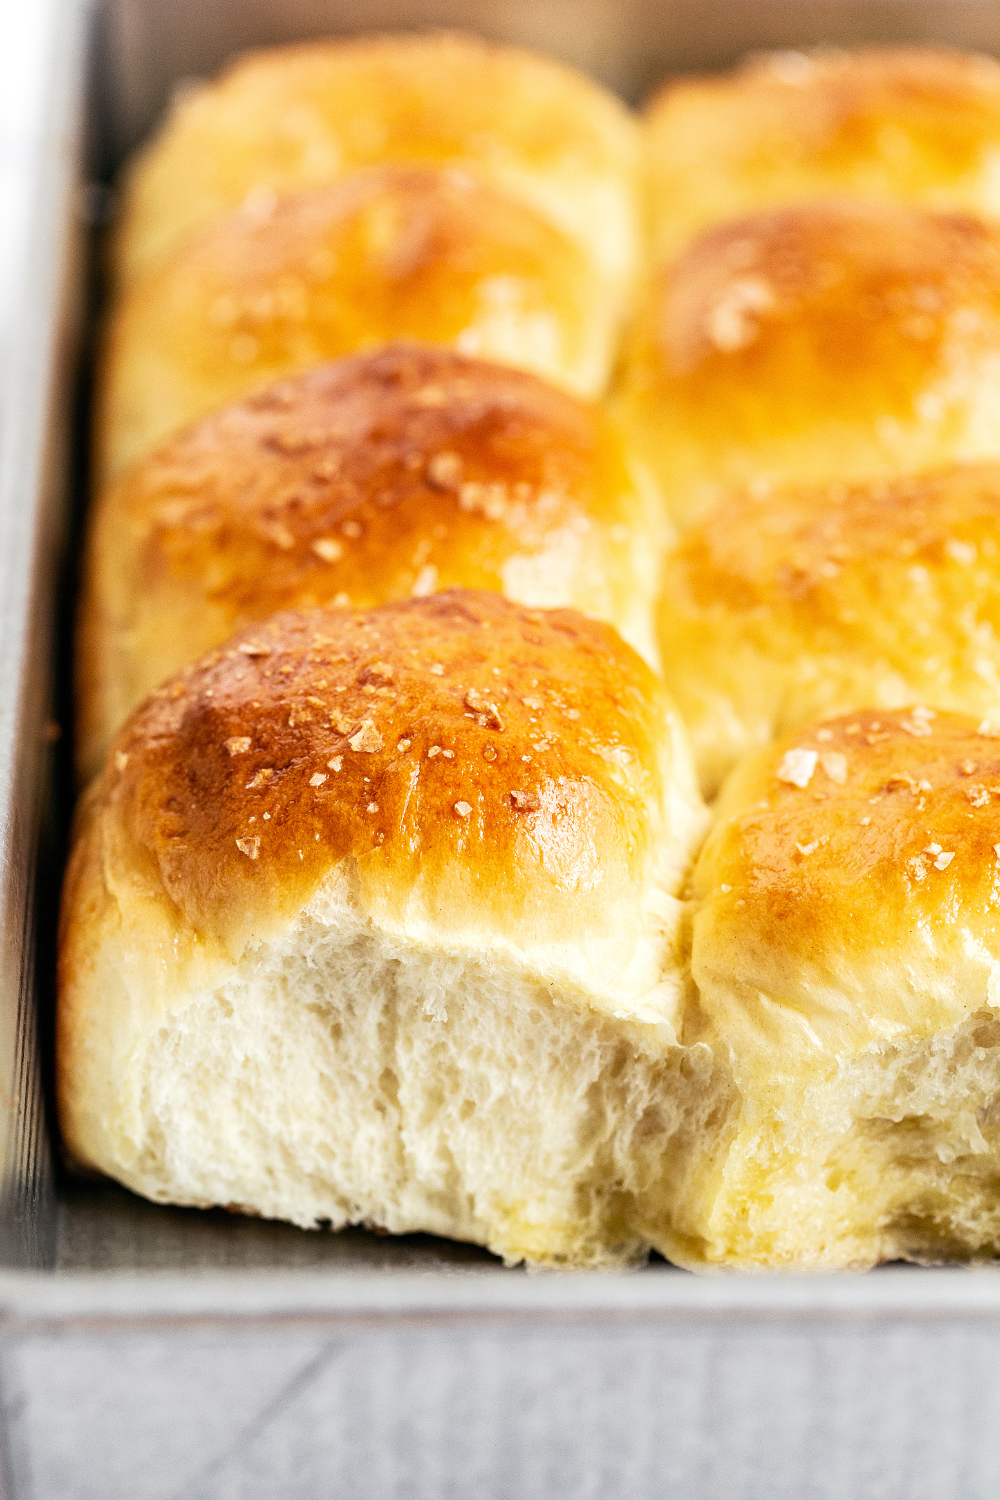 Soft Butter Dinner Rolls in their baking pan, ready to be served.